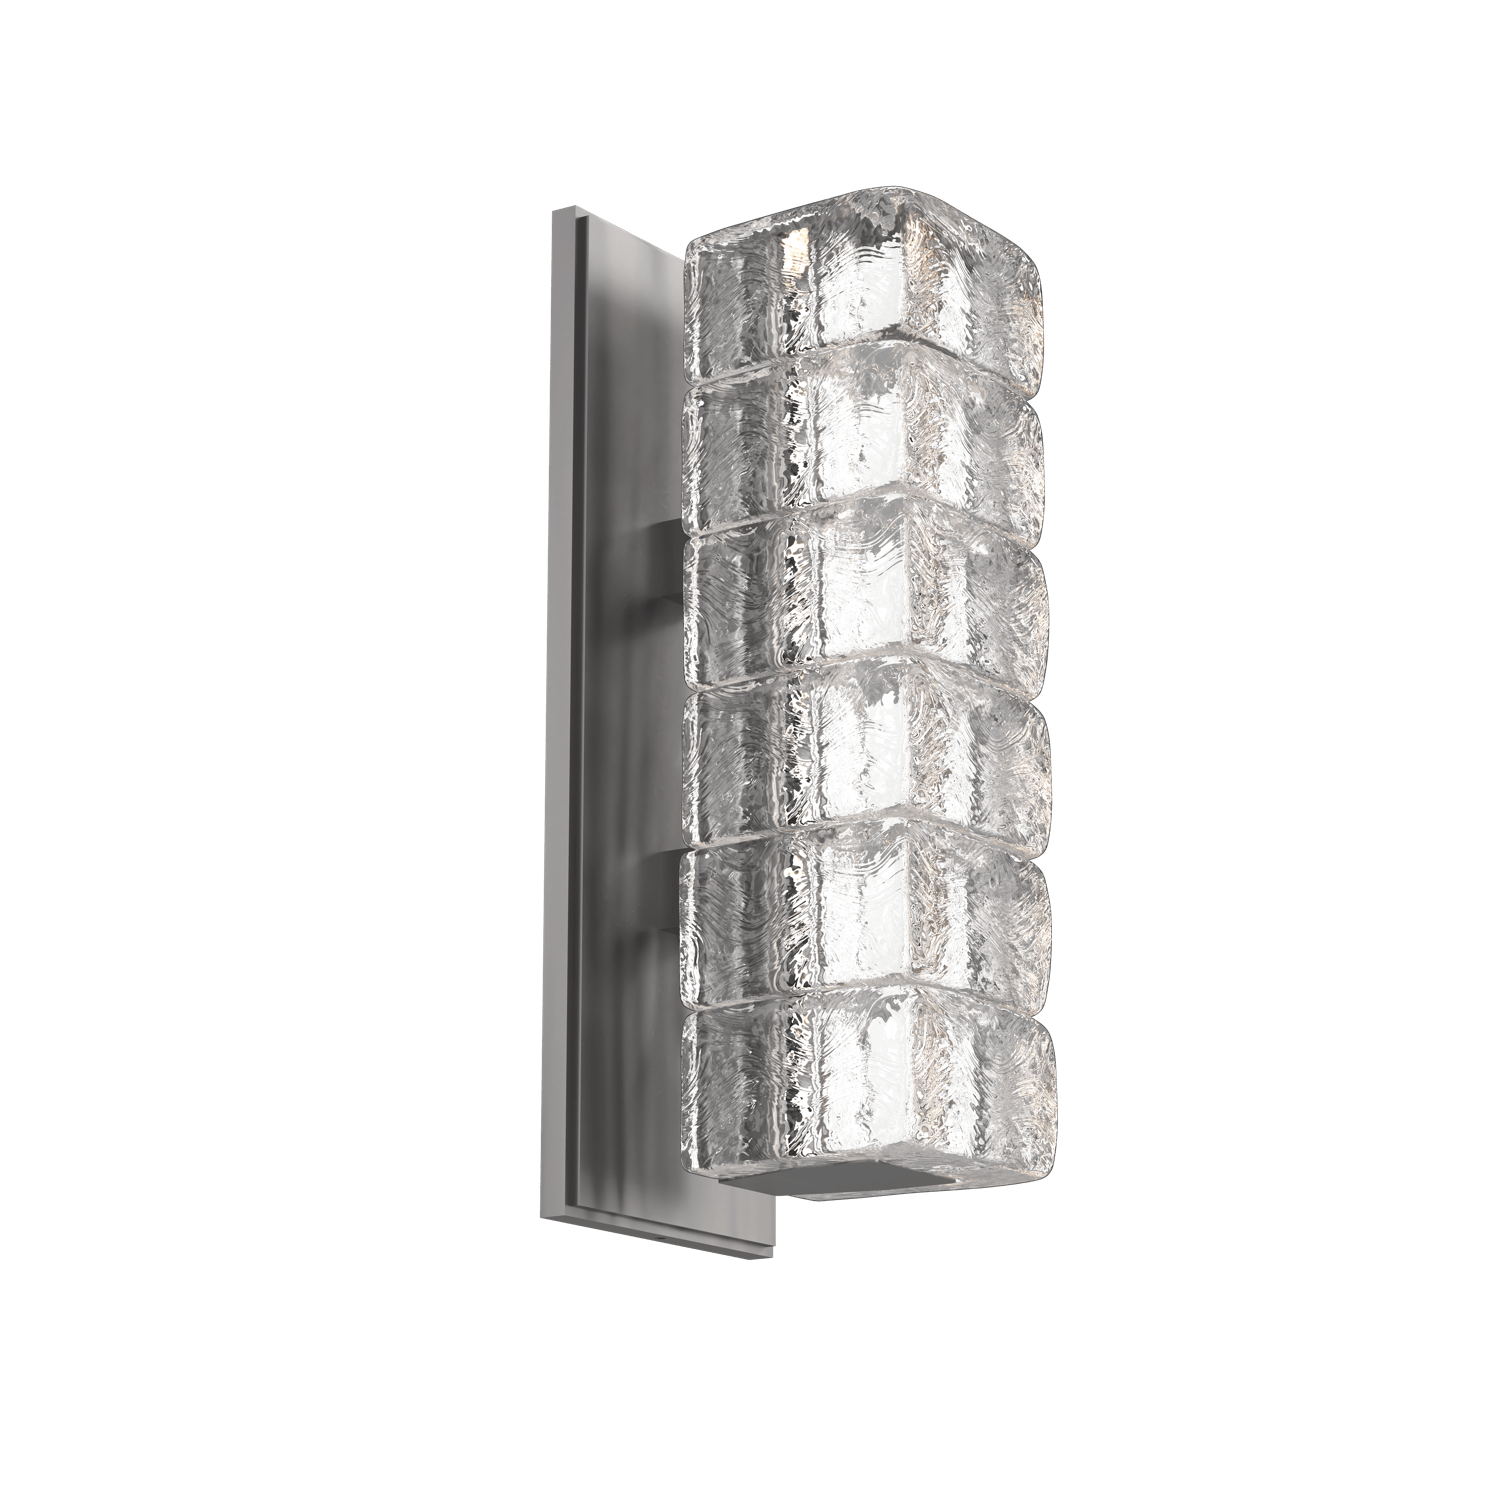 IDB0080-01-SN-Hammerton-Studio-Asscher-wall-sconce-with-satin-nickel-finish-and-clear-cast-glass-shades-and-LED-lamping